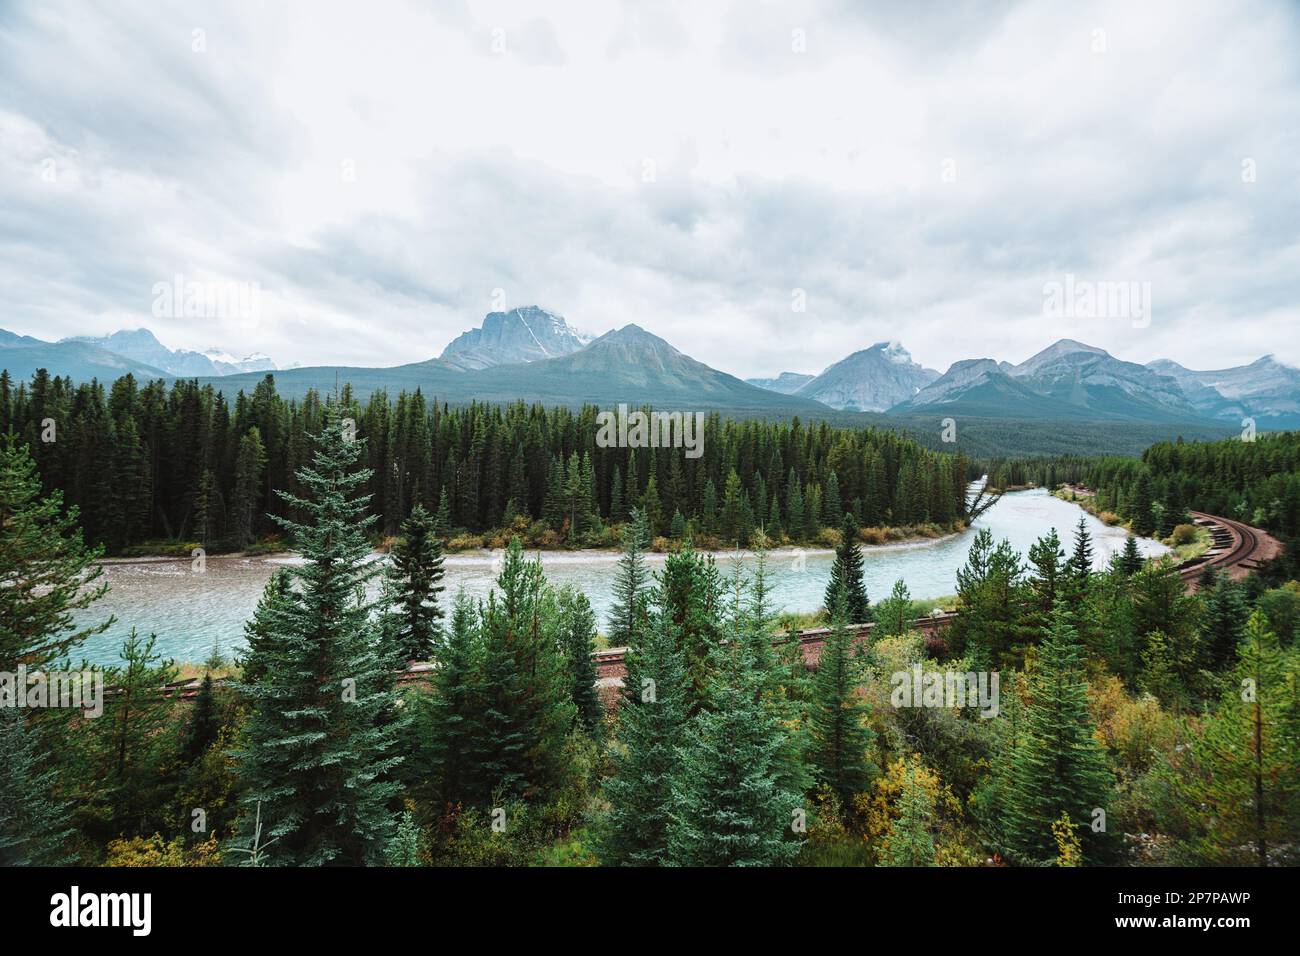 Morant's Curve: Bow River flows through forest and railway track. Storm Mountain in the background. Castle Cliff Viewpoint, Bow Valley Parkway, Banff Stock Photo